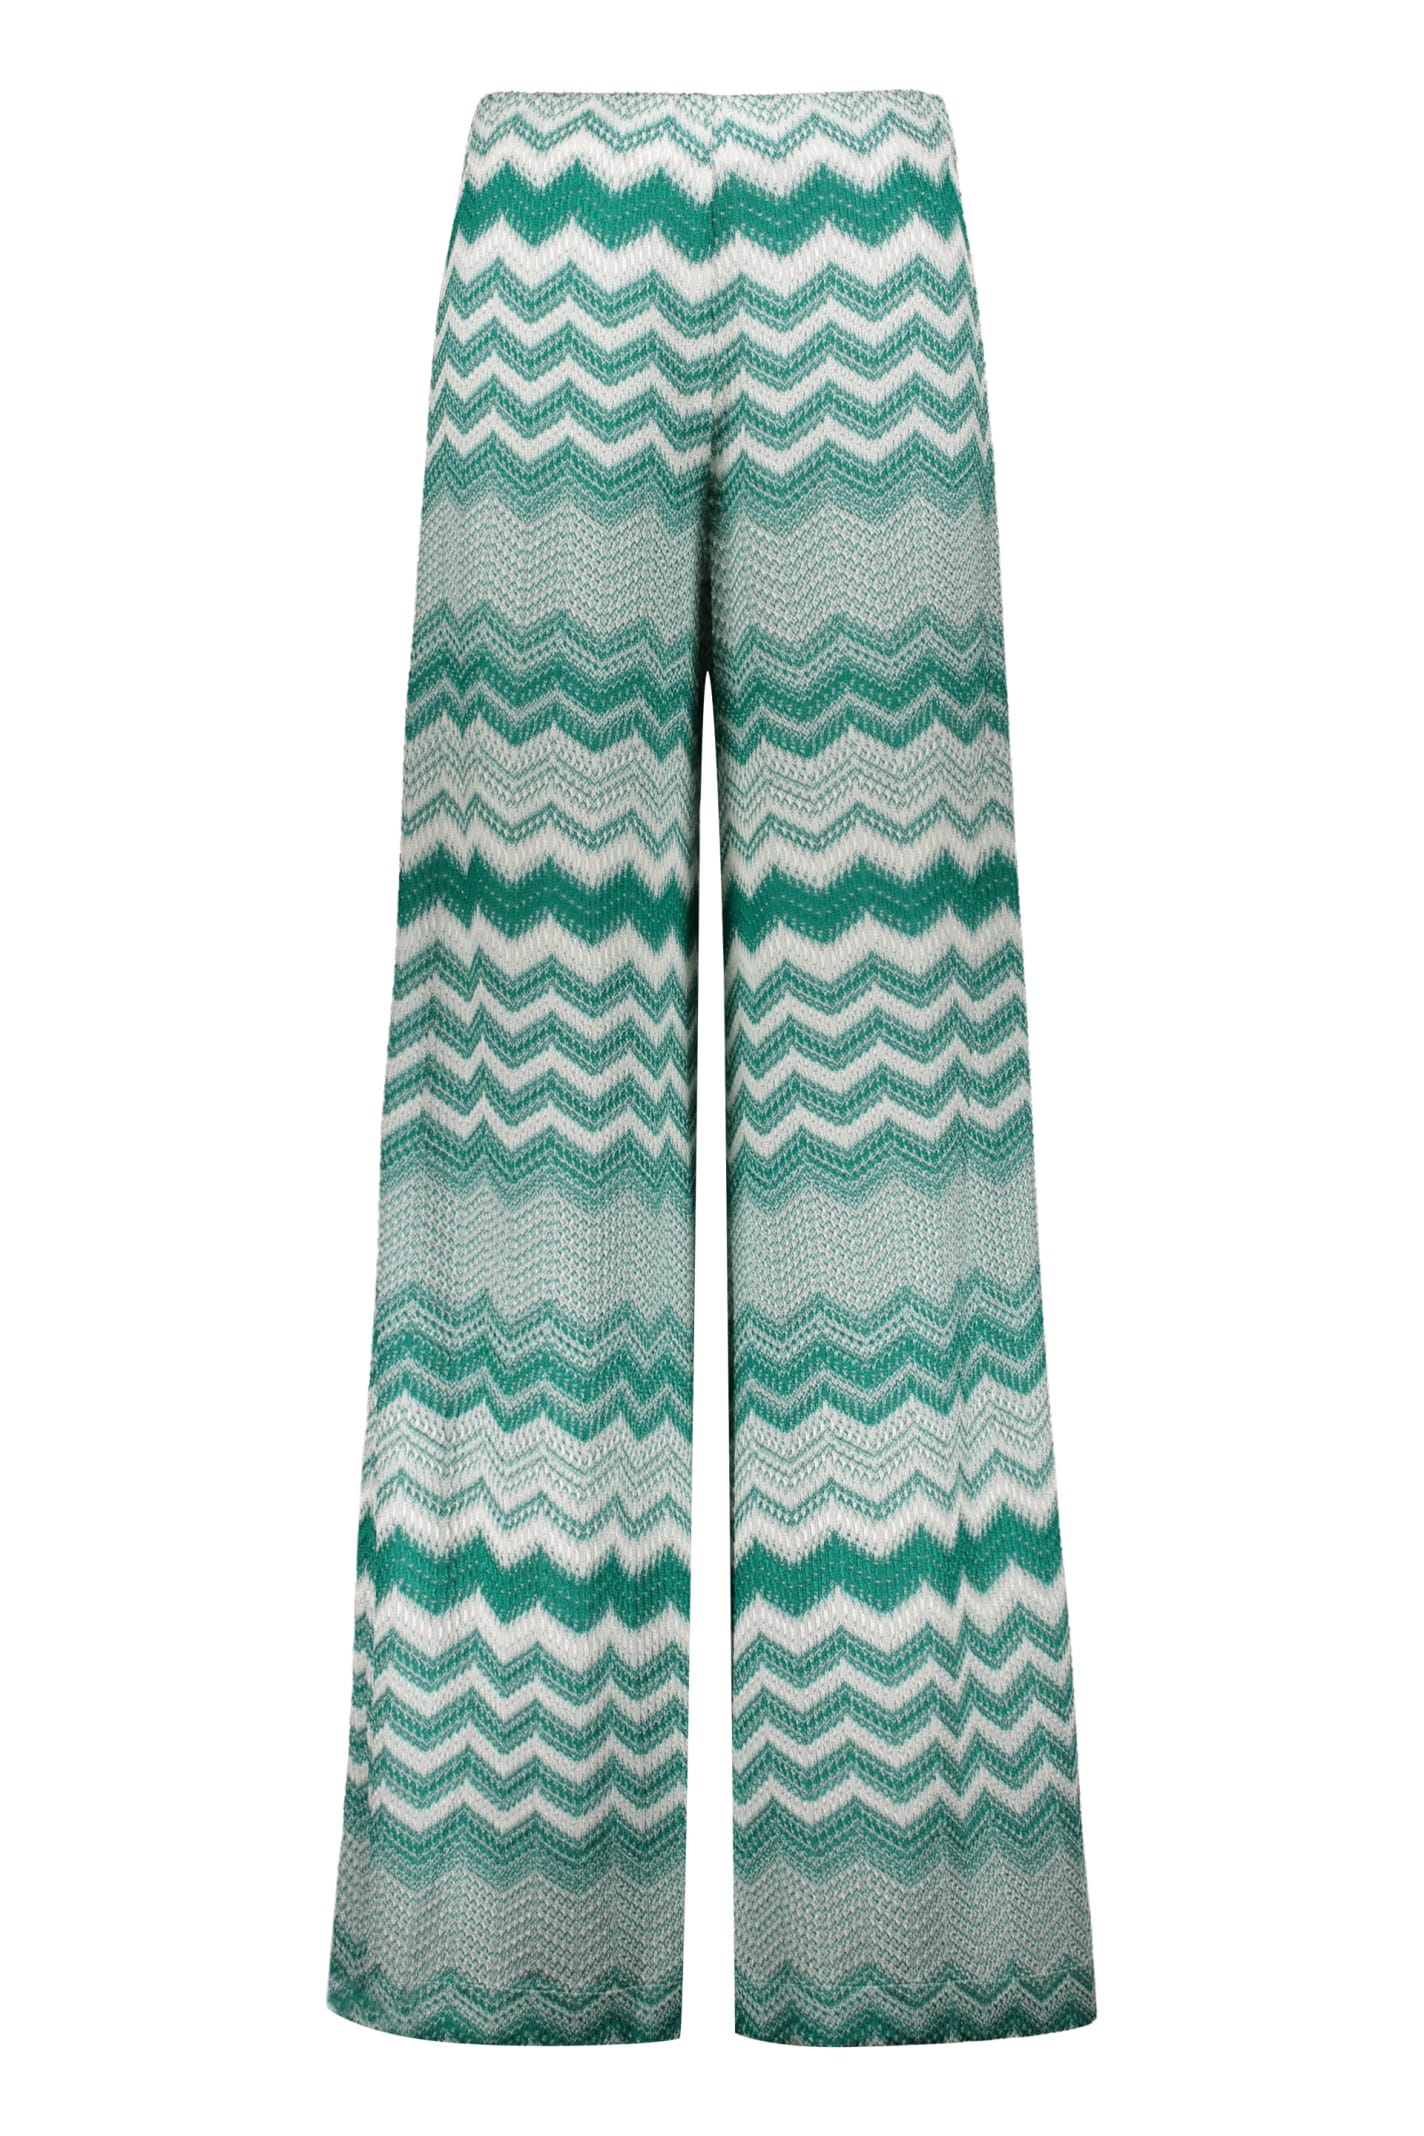 Missoni Chevron Knitted Palazzo Trousers In Green